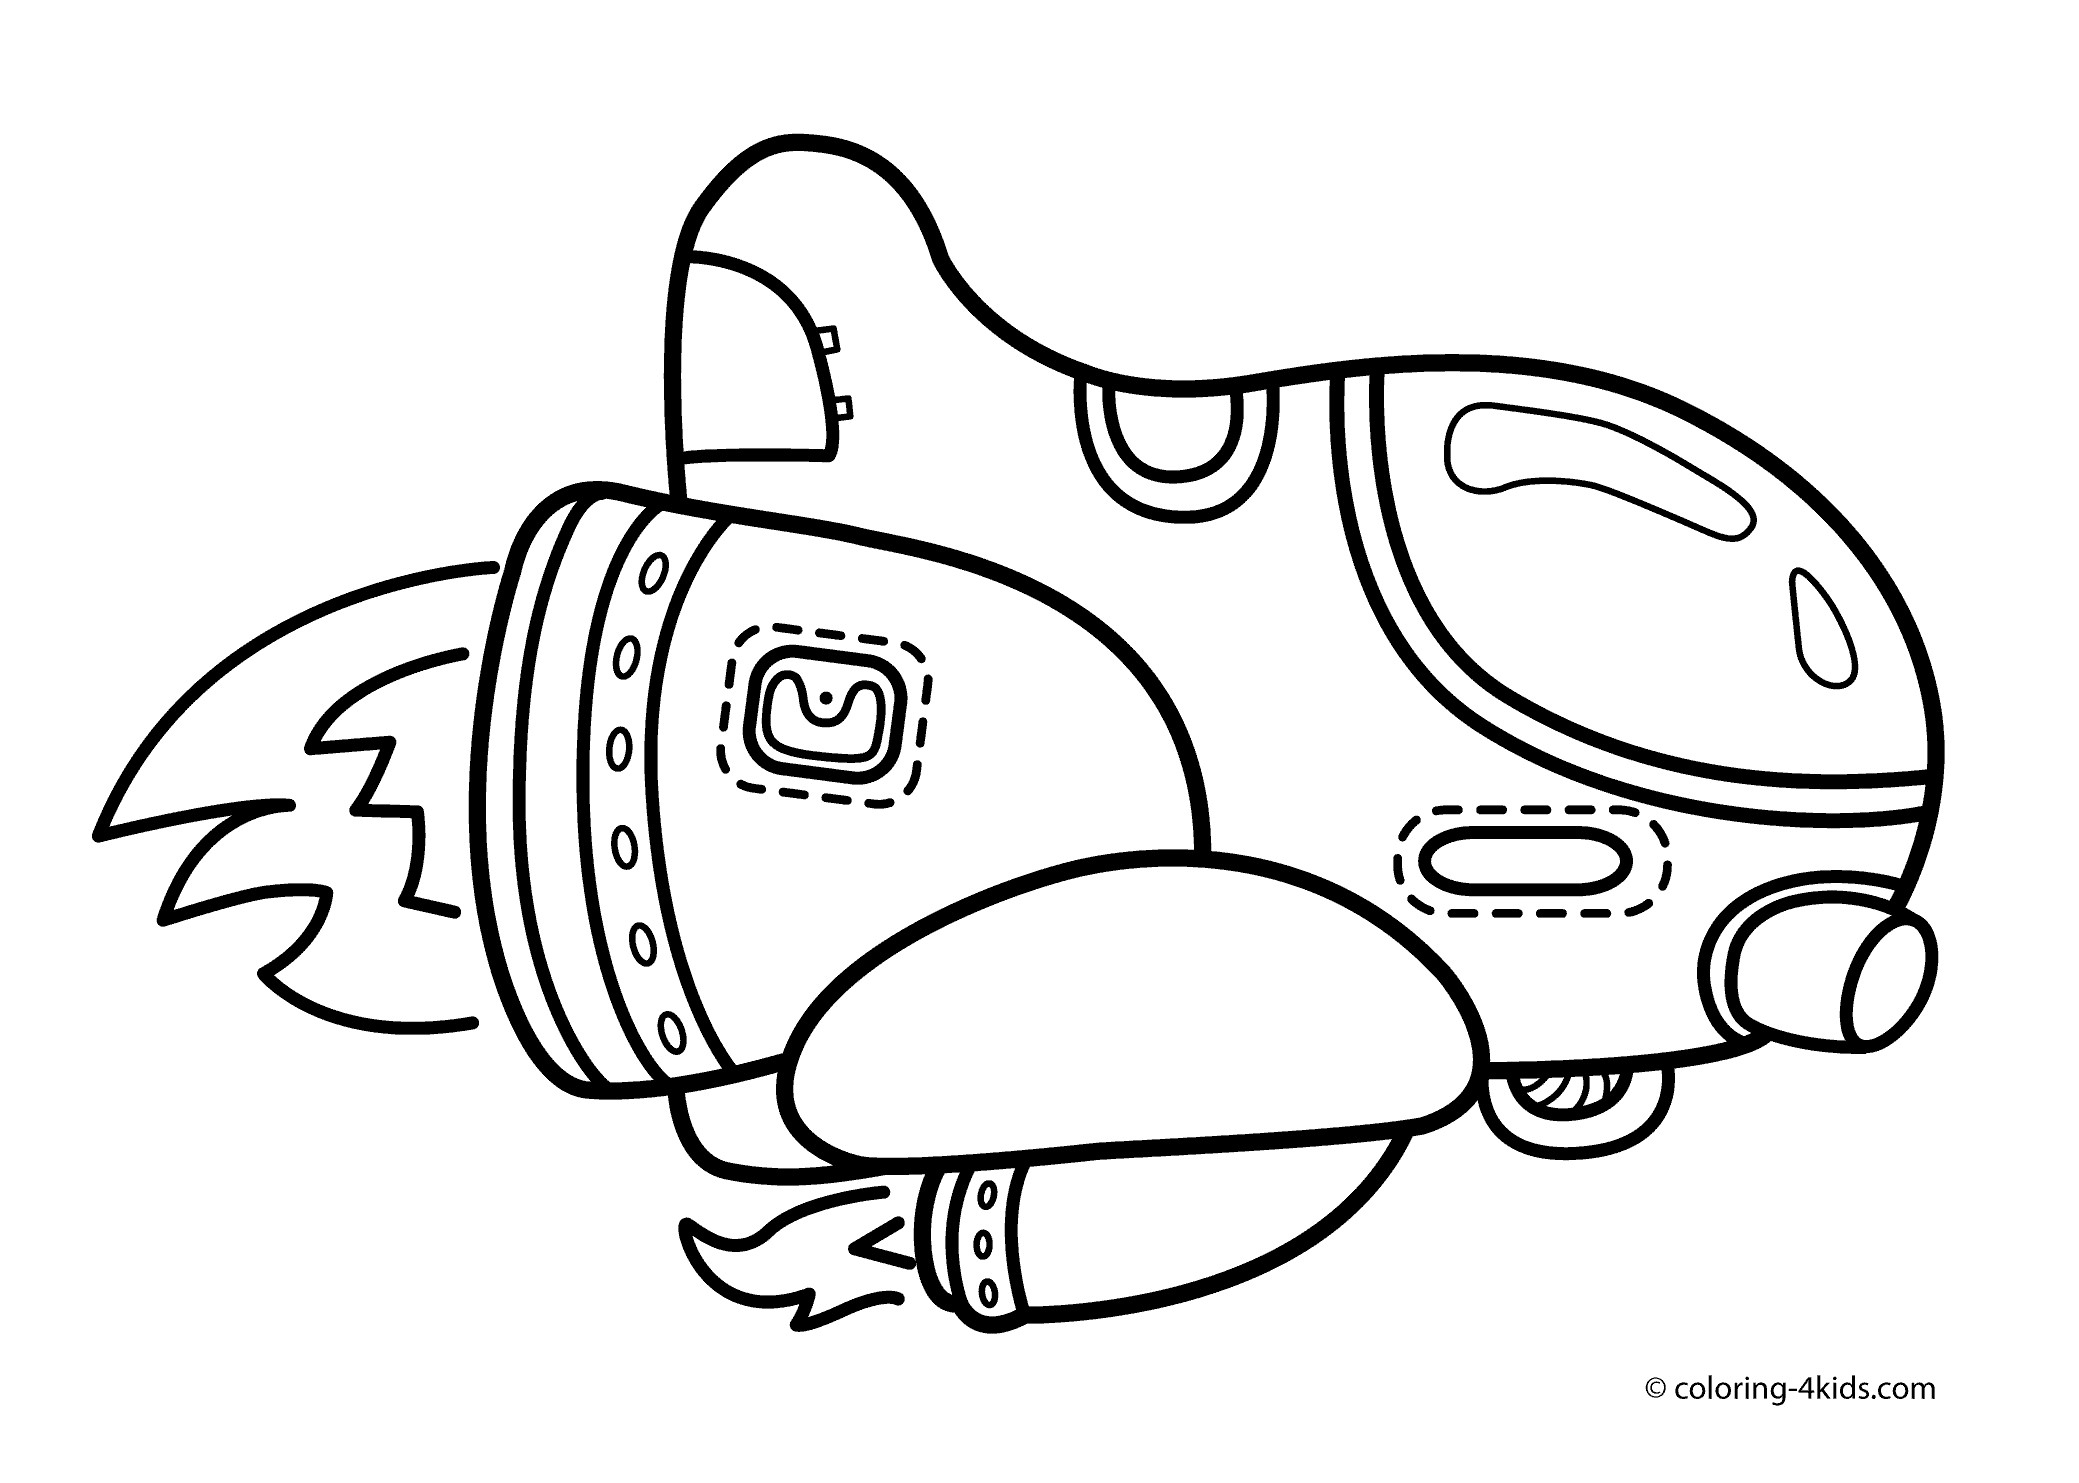 Rocket Coloring Pages For Kids at GetColorings.com | Free printable